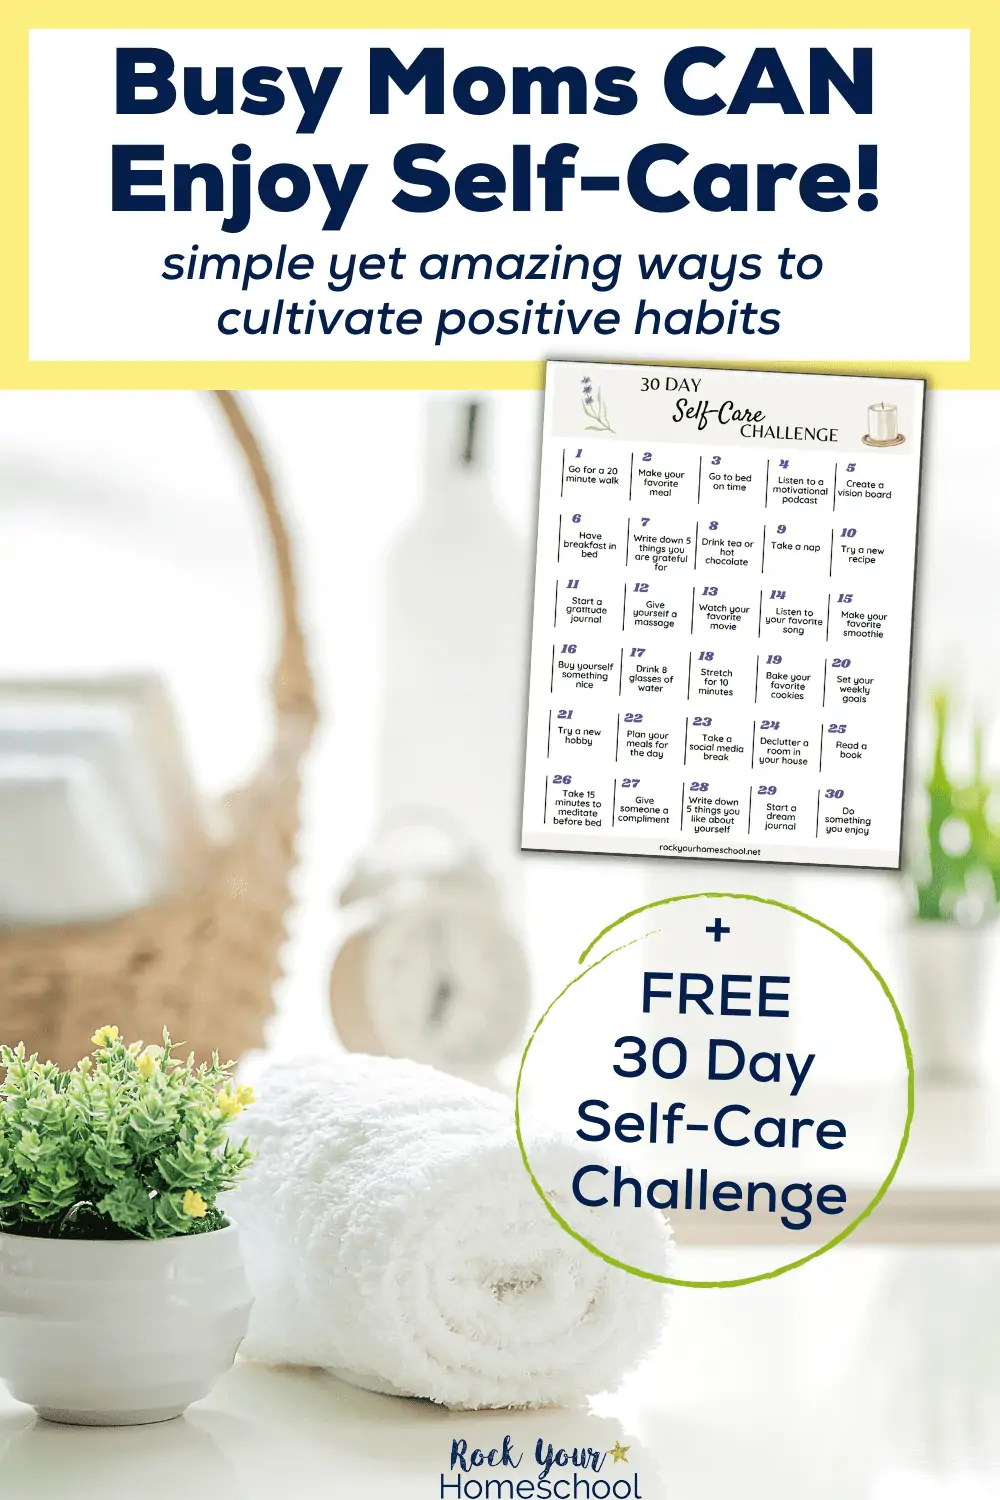 30 Day Self-Care Challenge for Busy Moms (with Fantastic Ideas and Free Printable)